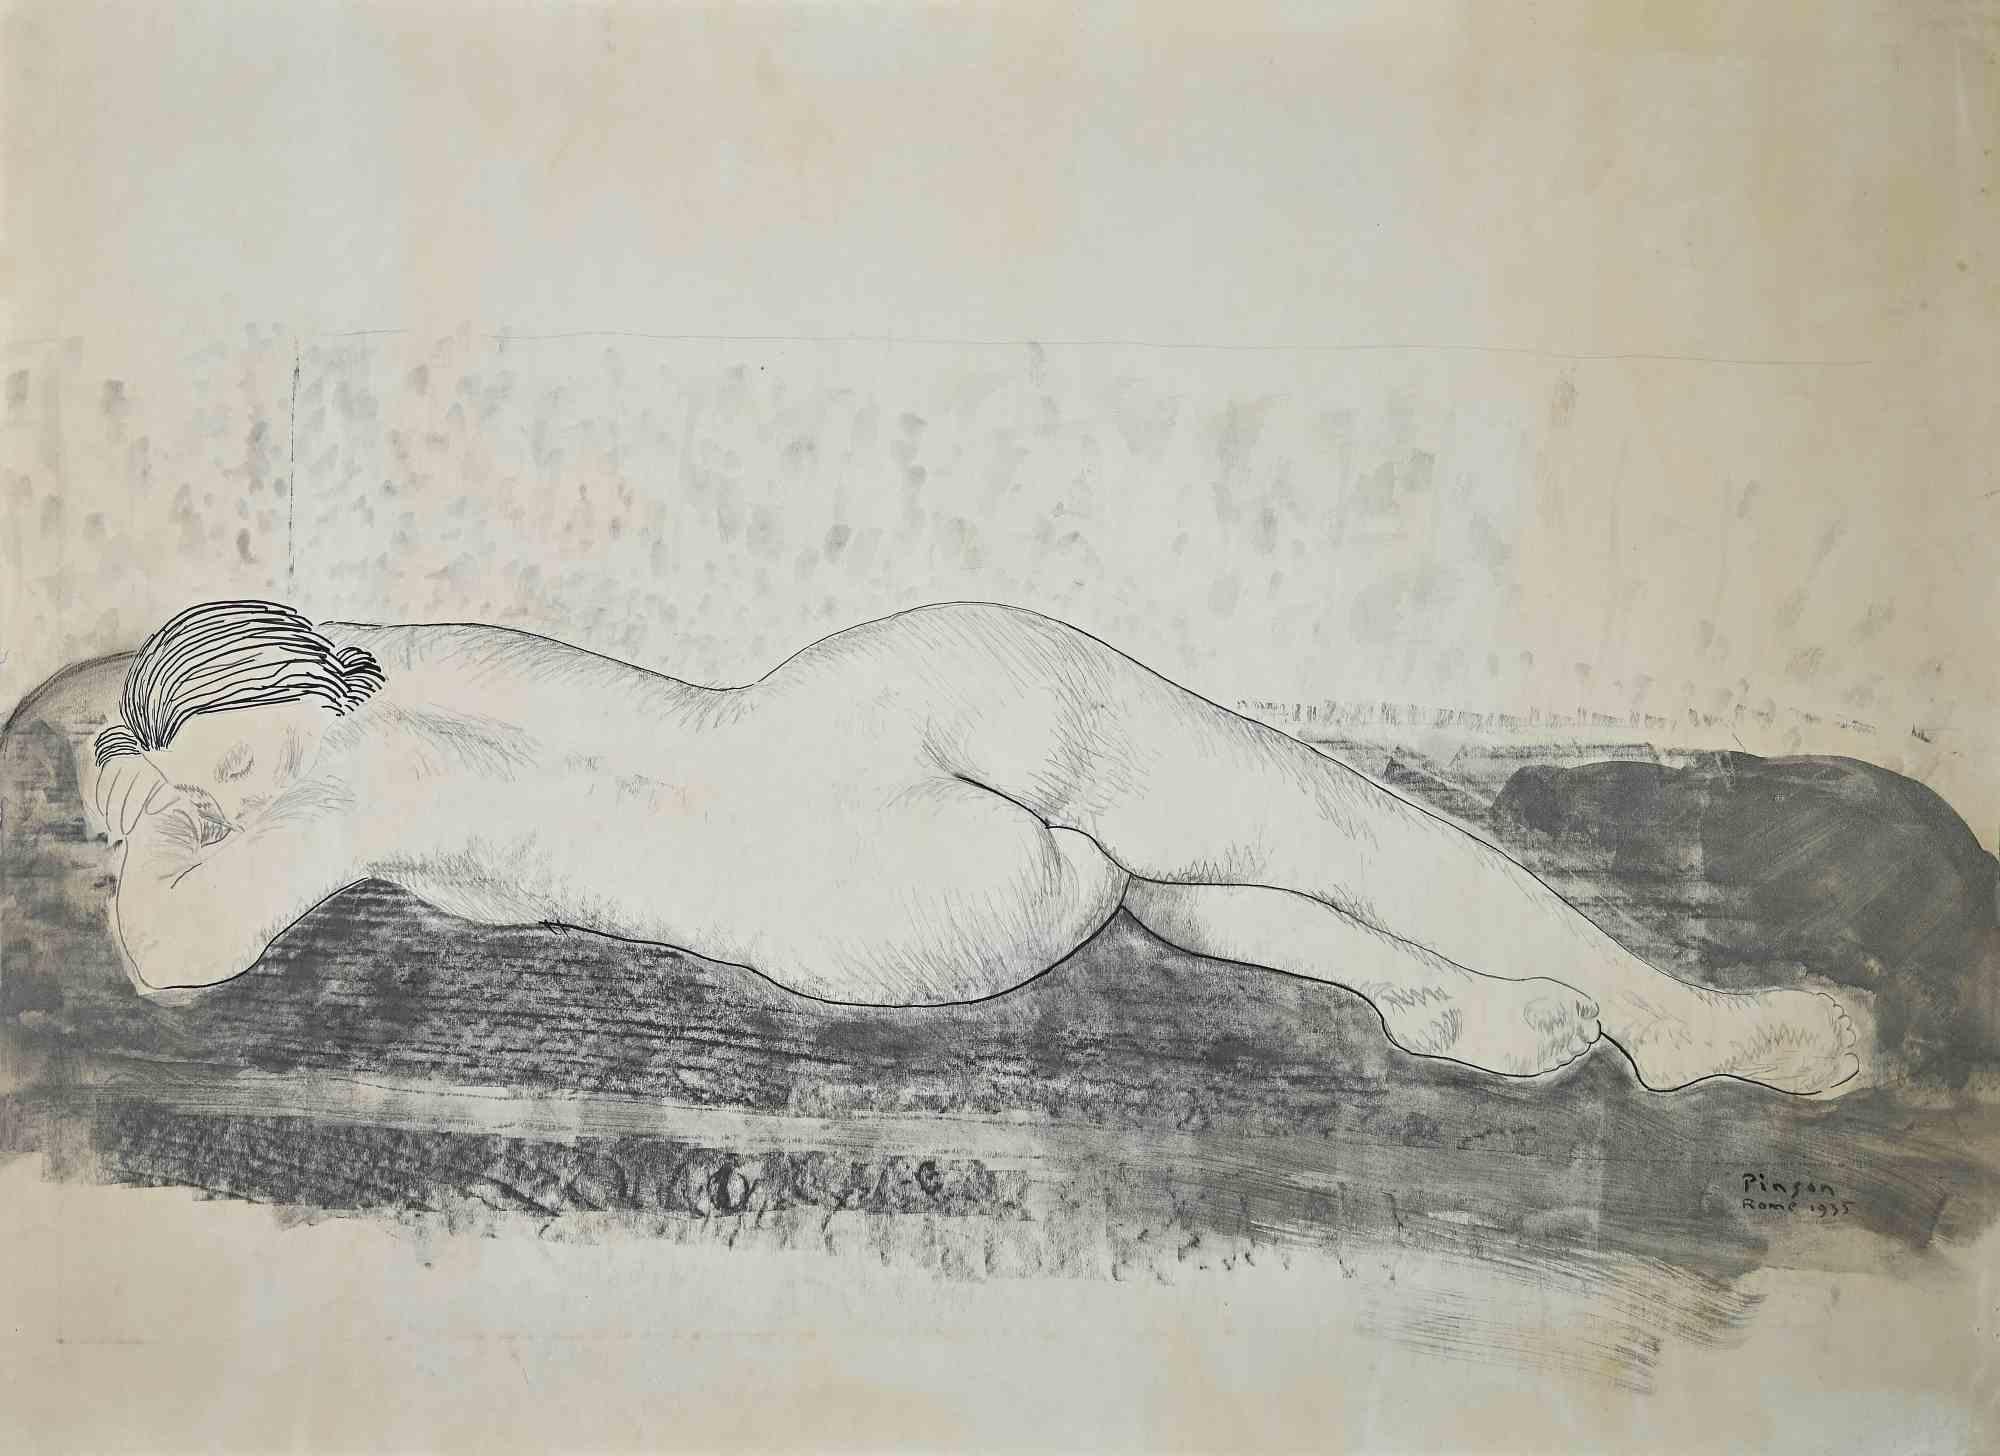 Nude of Woman - Original China Ink and watercolour by C.E. Pinson - 1935 - Art by Pinson Charles-Emile